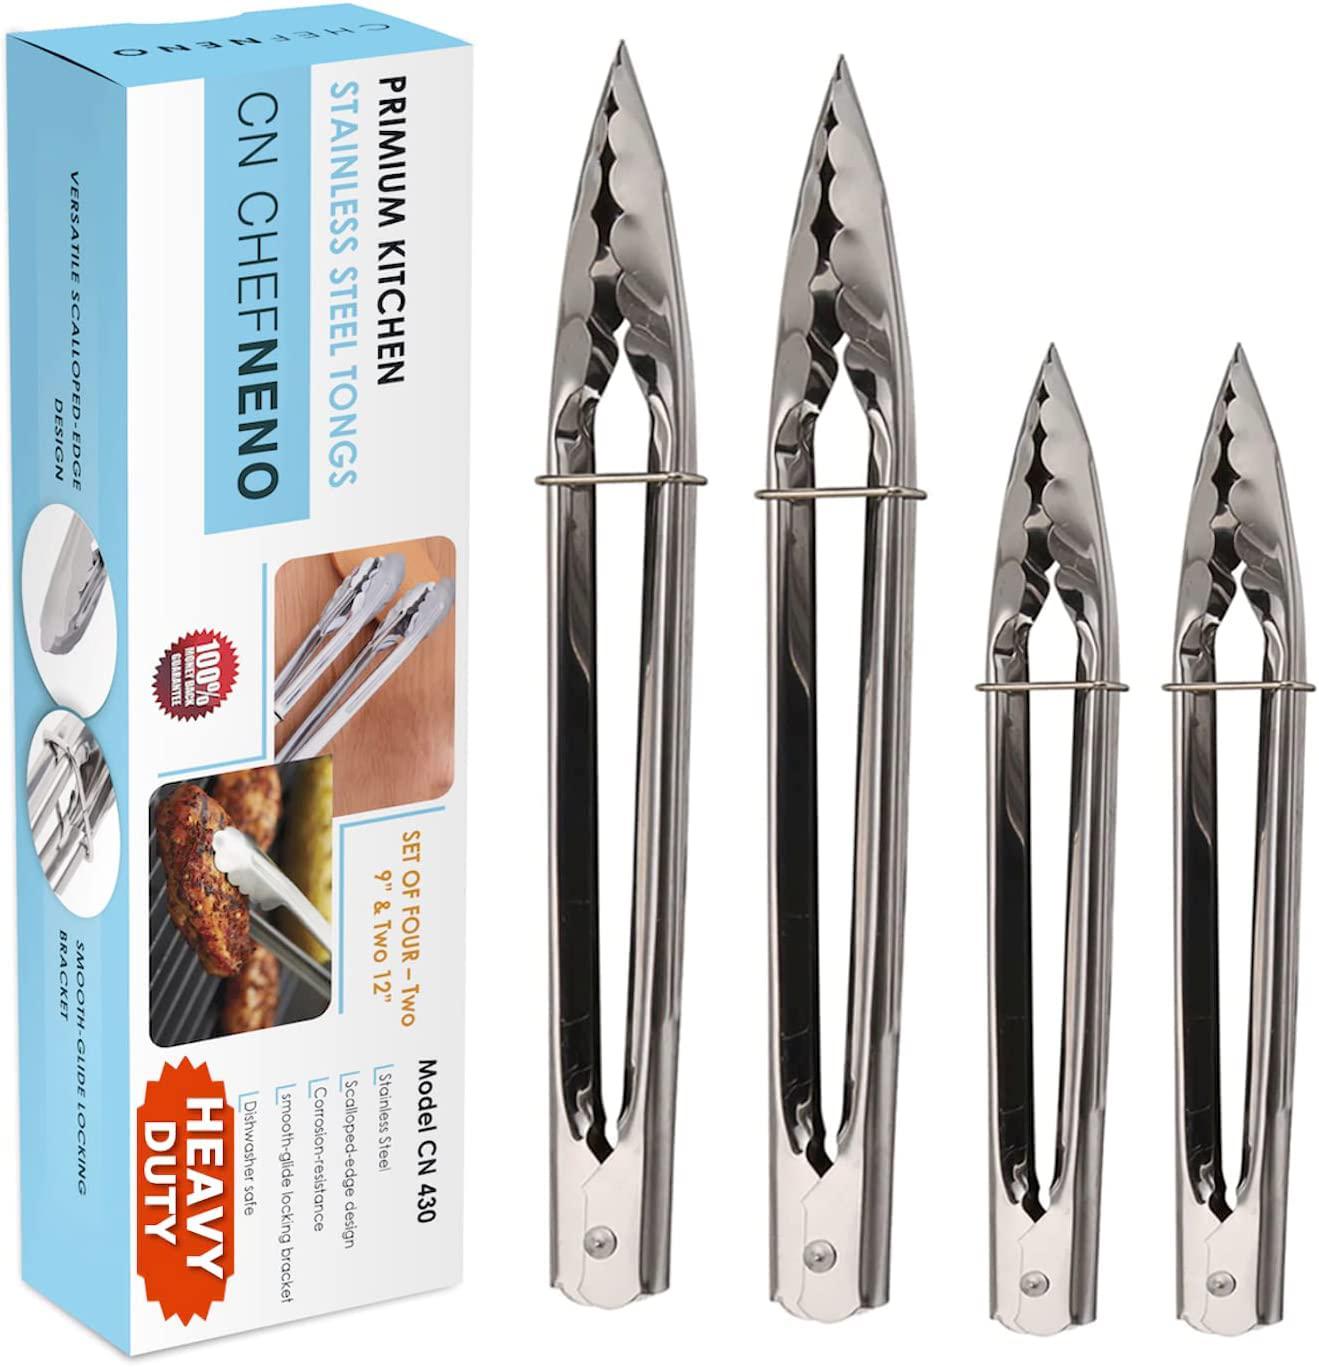 ChefNeno chefneno heavy duty kitchen food tongs stainless steel tongs  utility metal tongs 12 inch and 9 inch (4 pack) for cooking gril